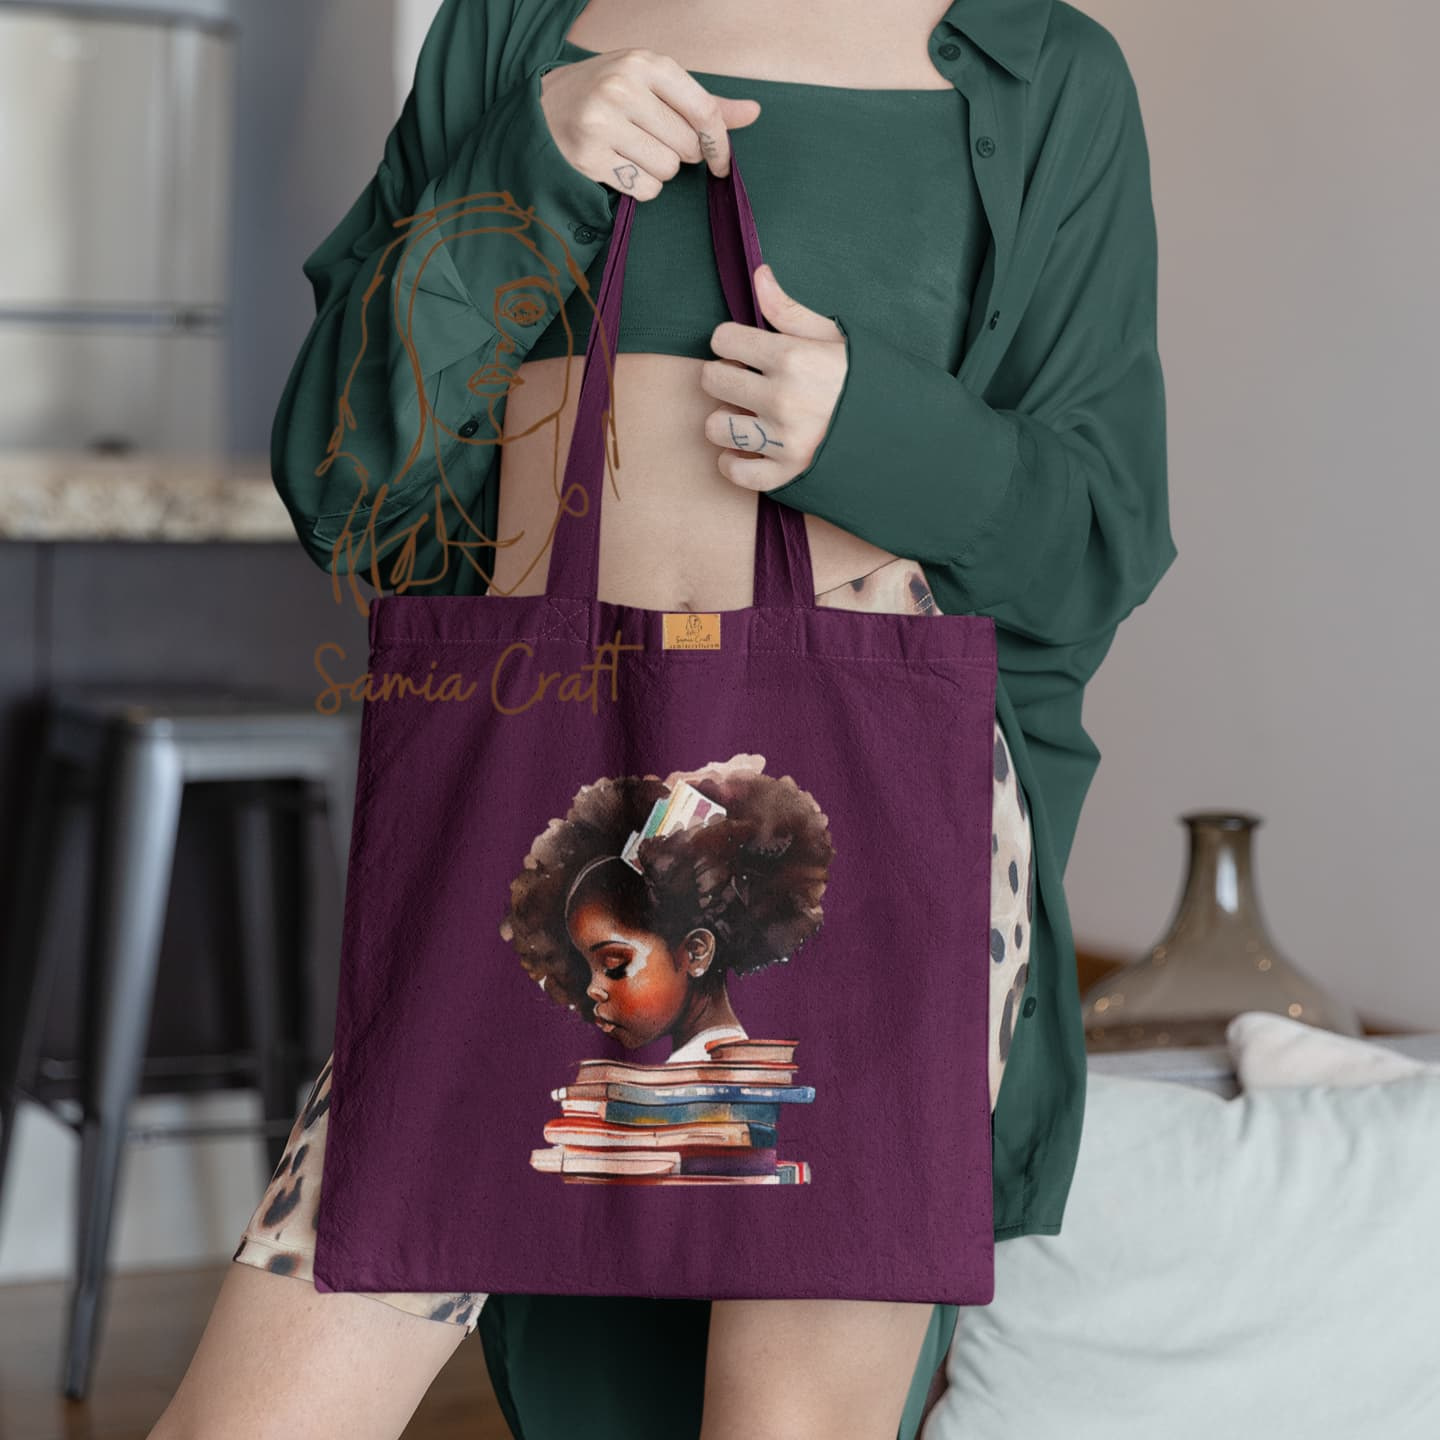 Indian Girl Carrying Books Color Medium Size Tote Bag - Samia Craft